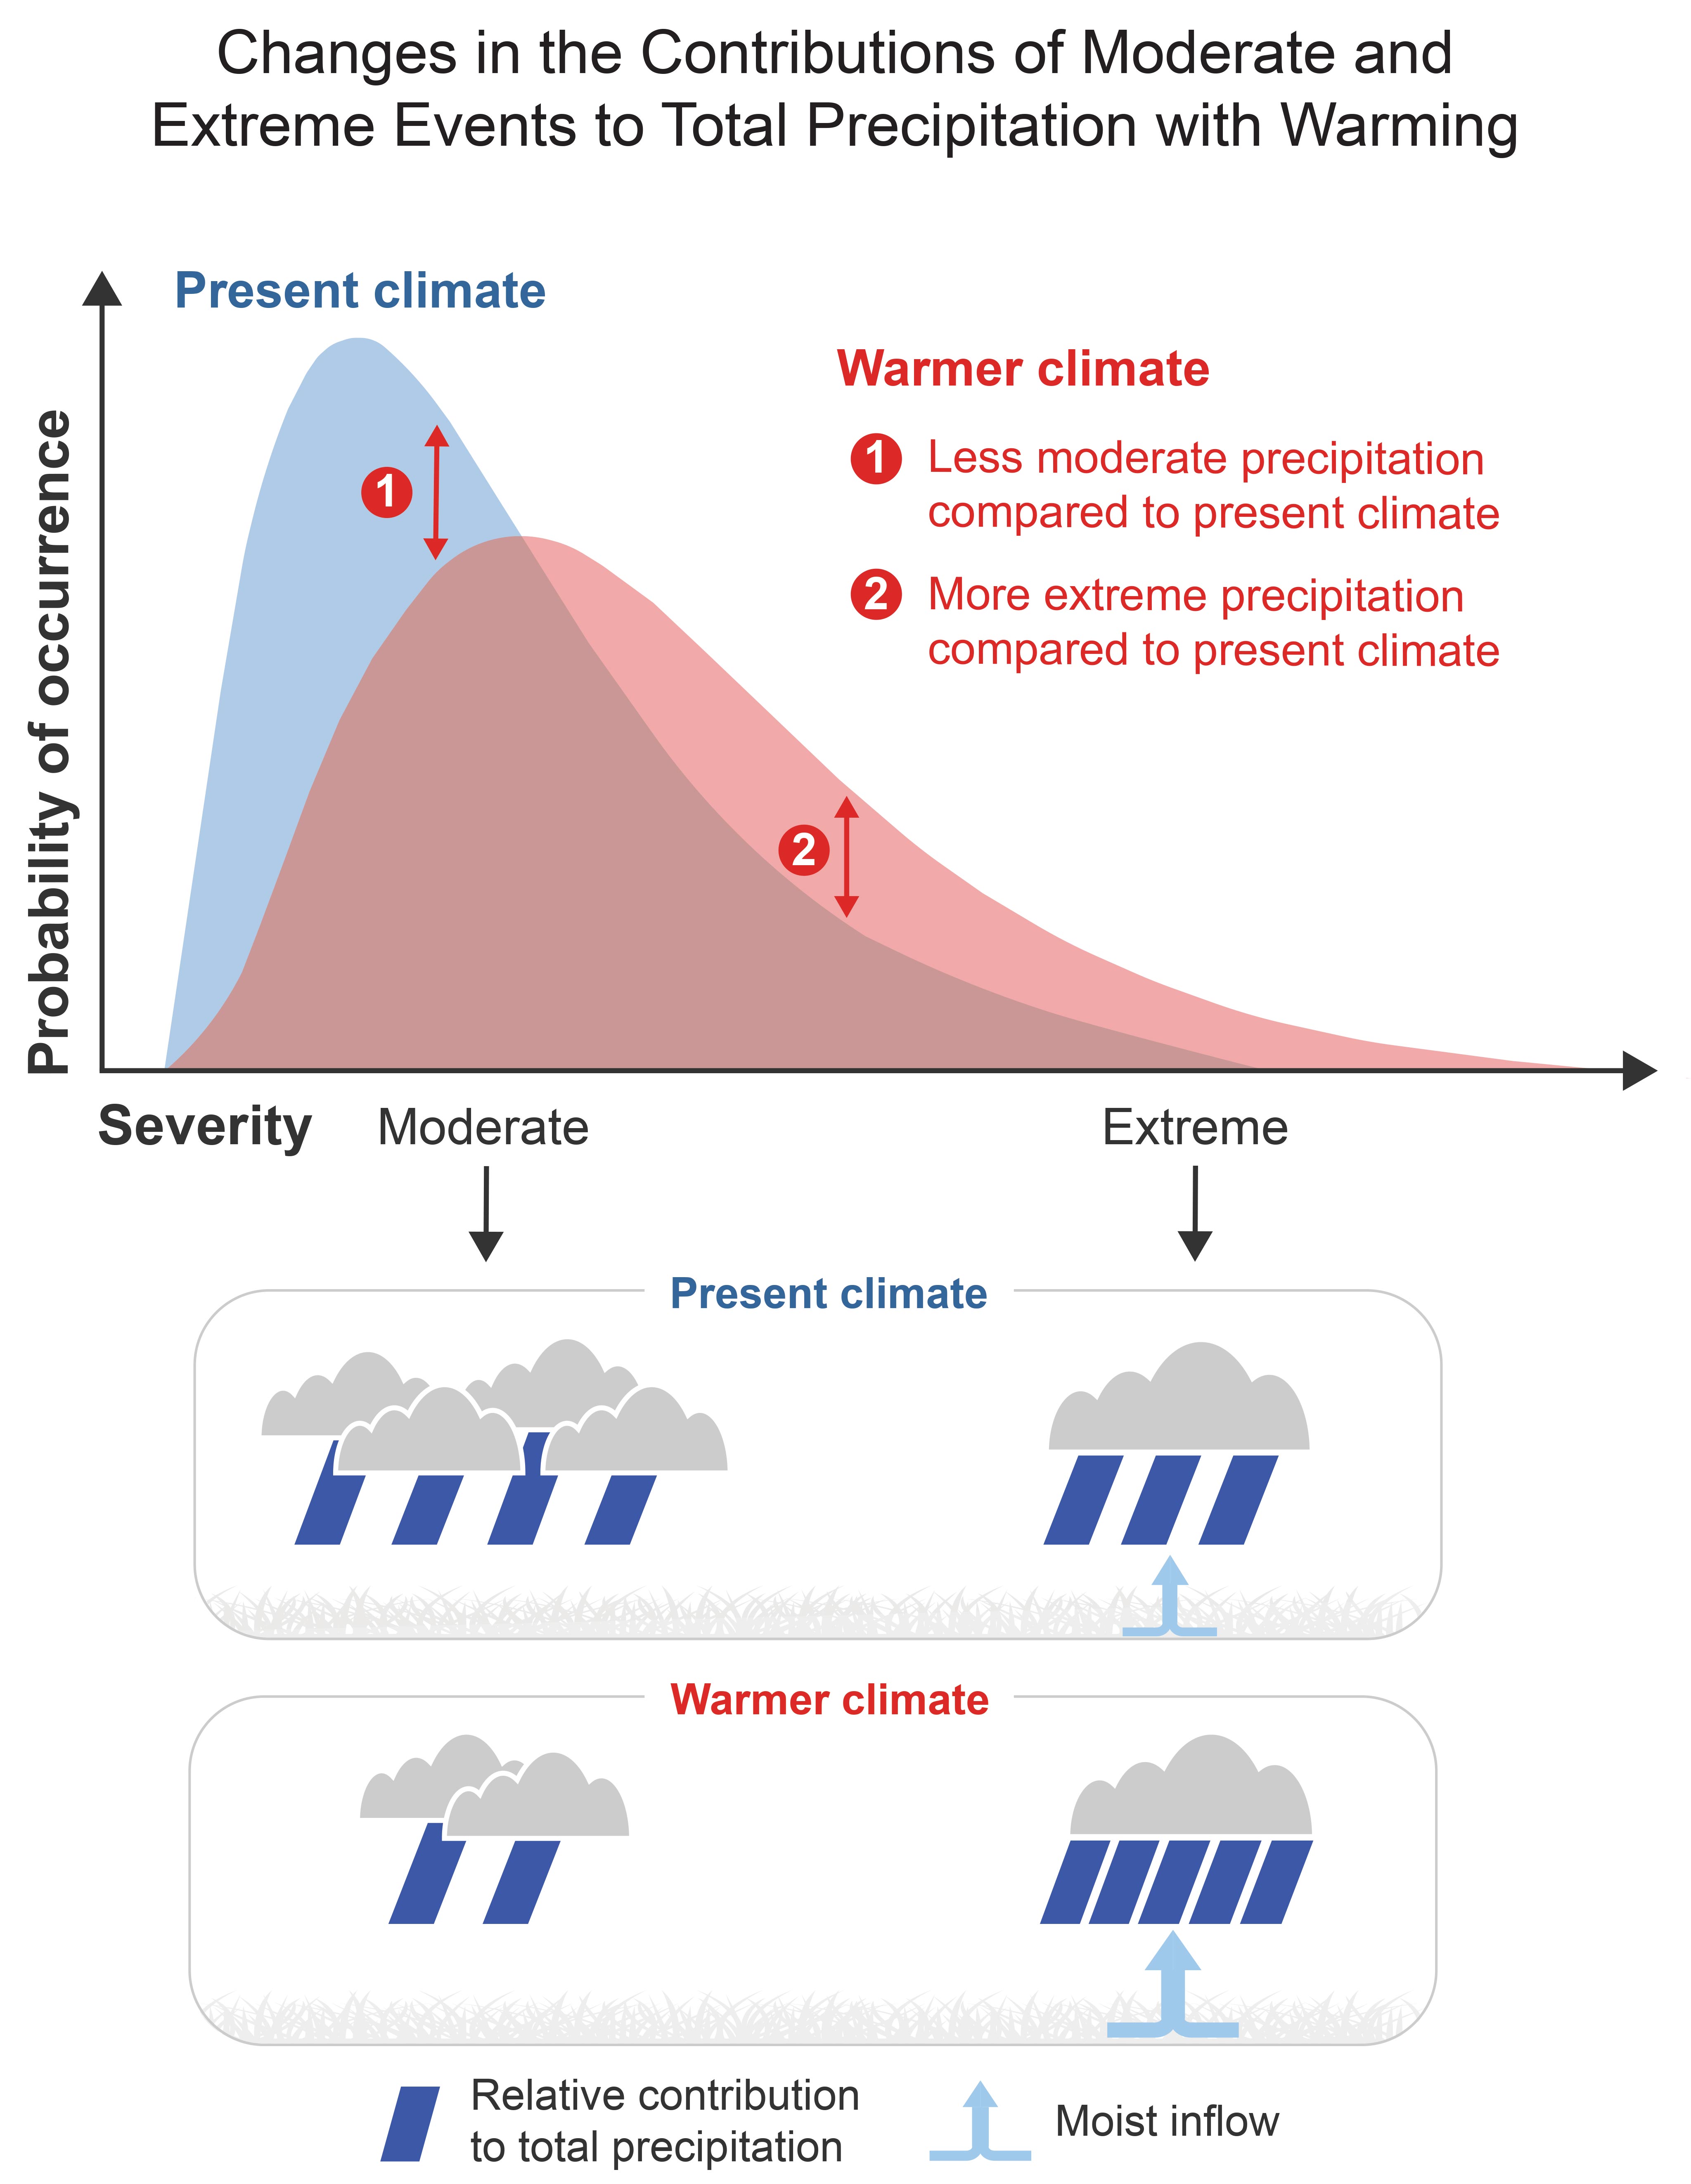 Changes in the Contributions of Moderate and Extreme Events to Total Precipitation with Warming